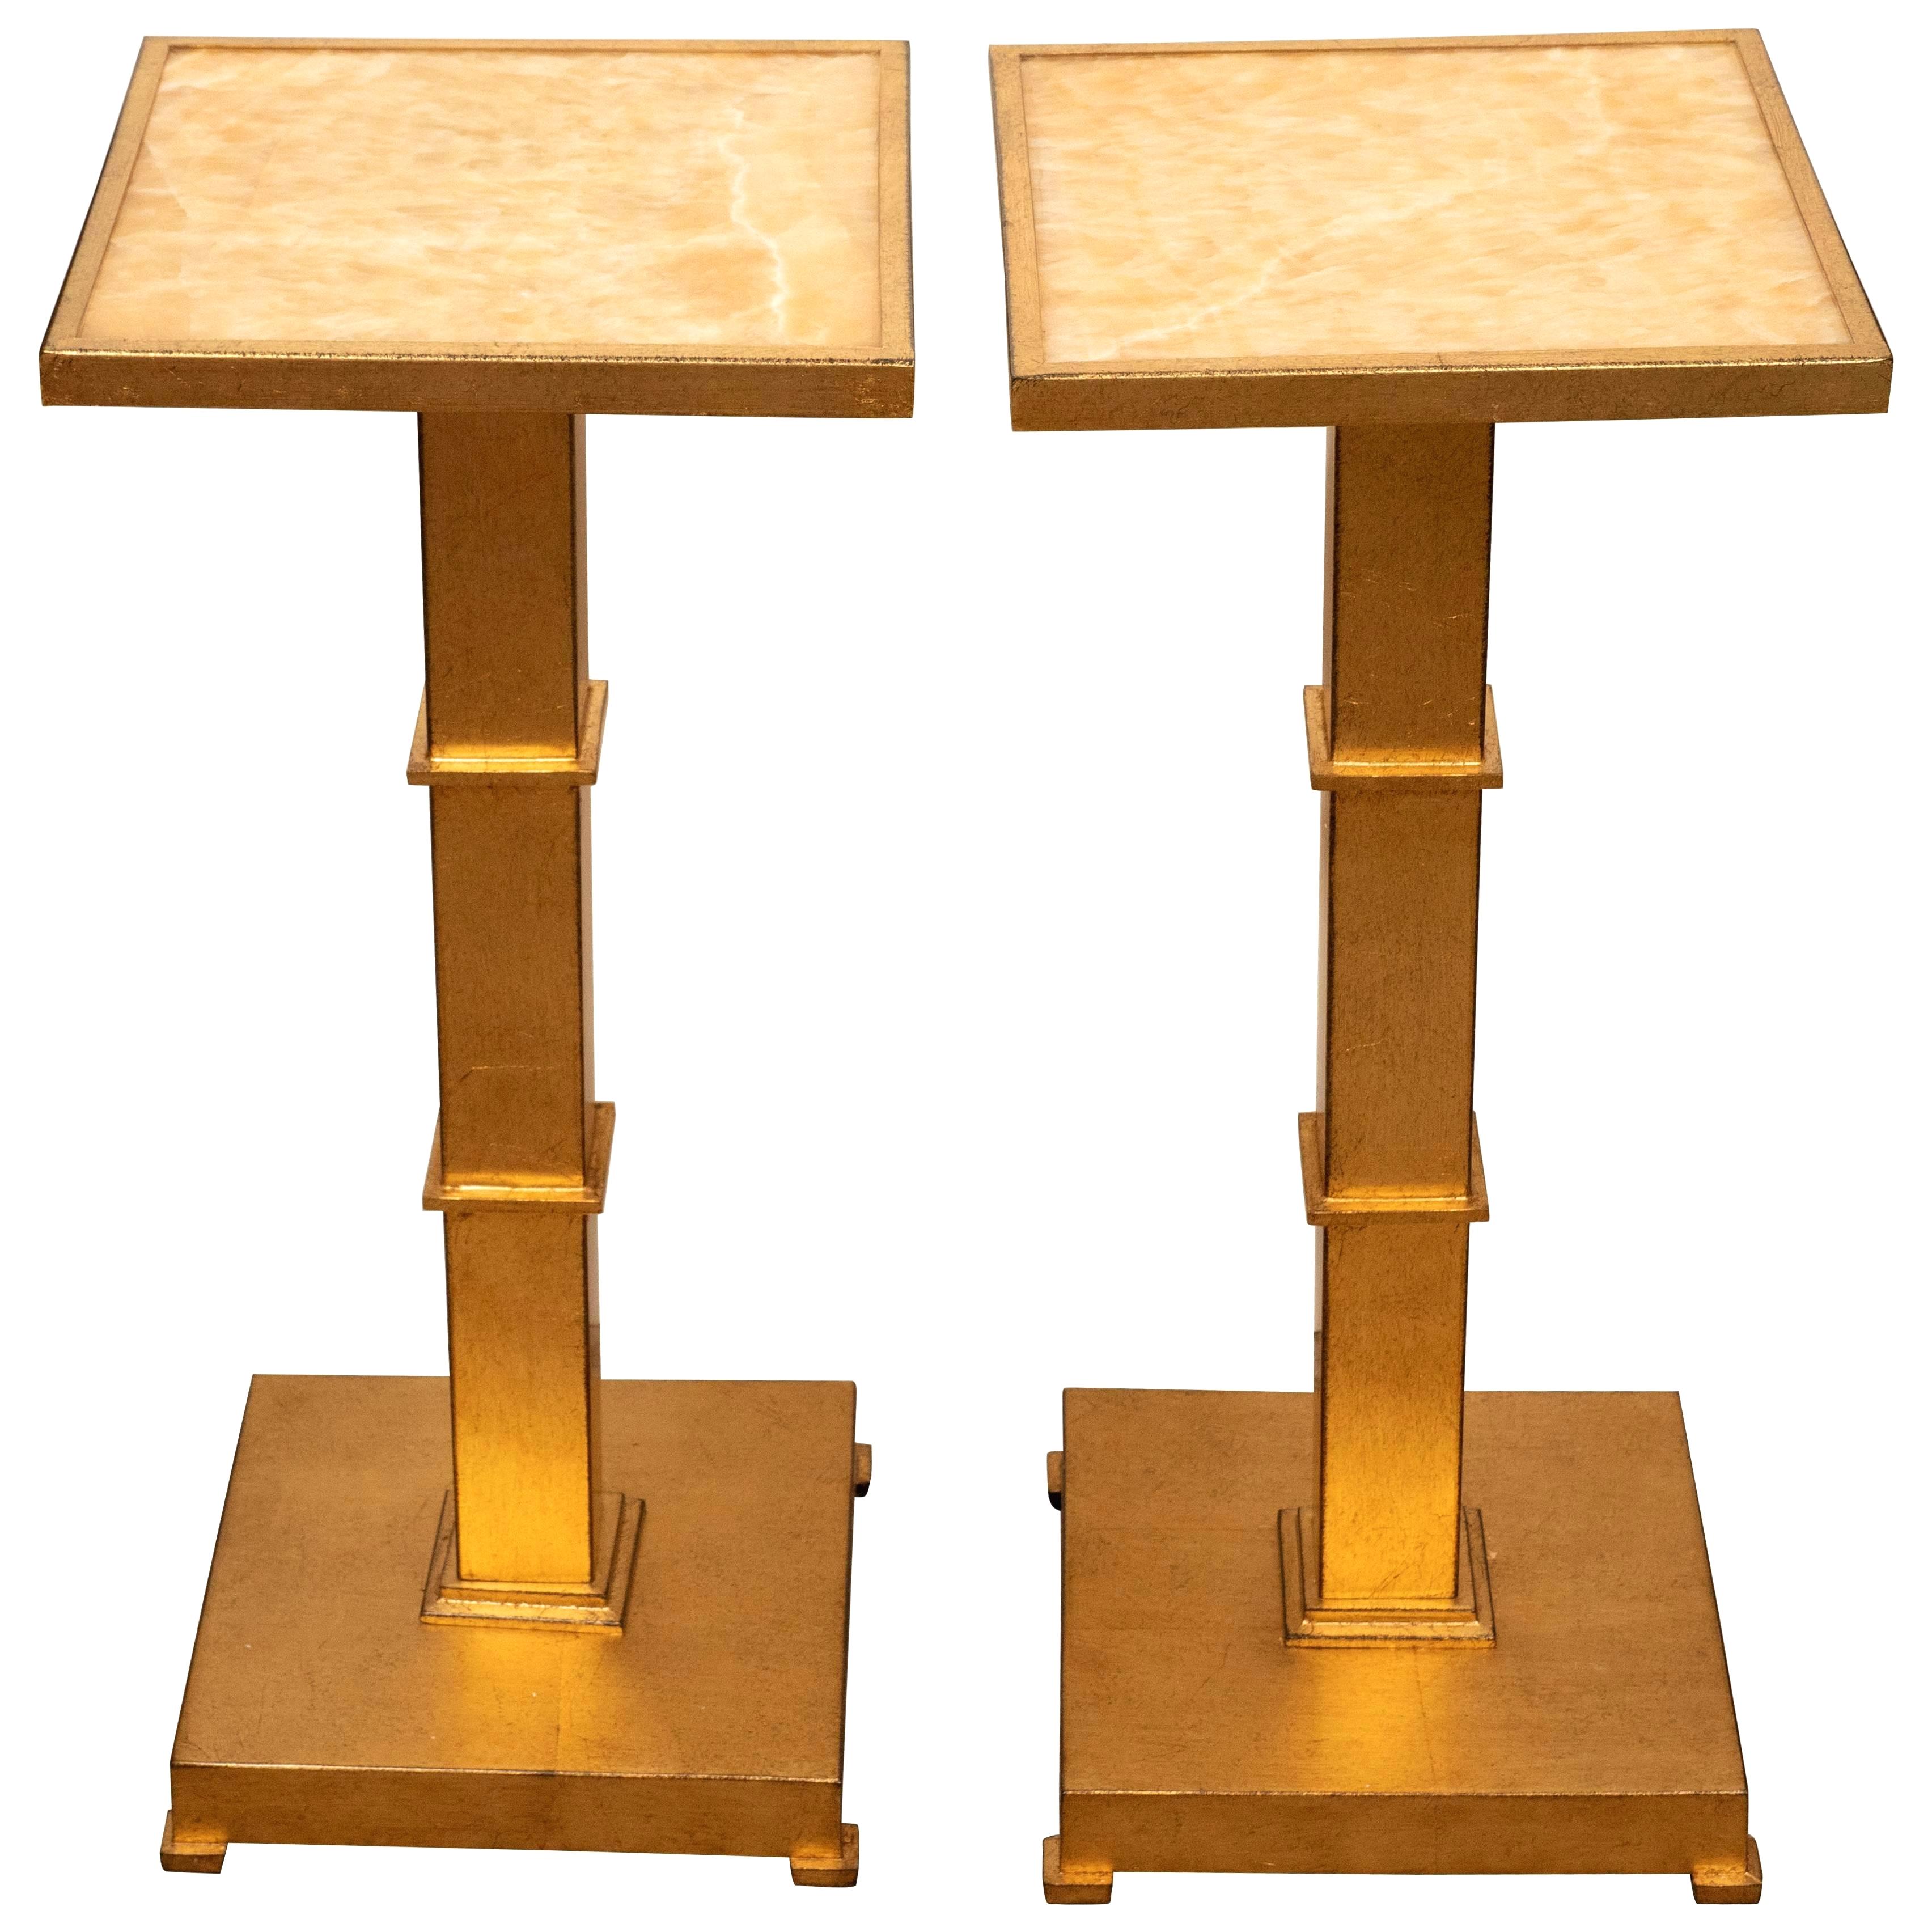 accent tables for cape table wrought iron marble gold leaf vintage target threshold top corner desk concrete and wood cream colored tablecloth french pottery barn tablecloths side